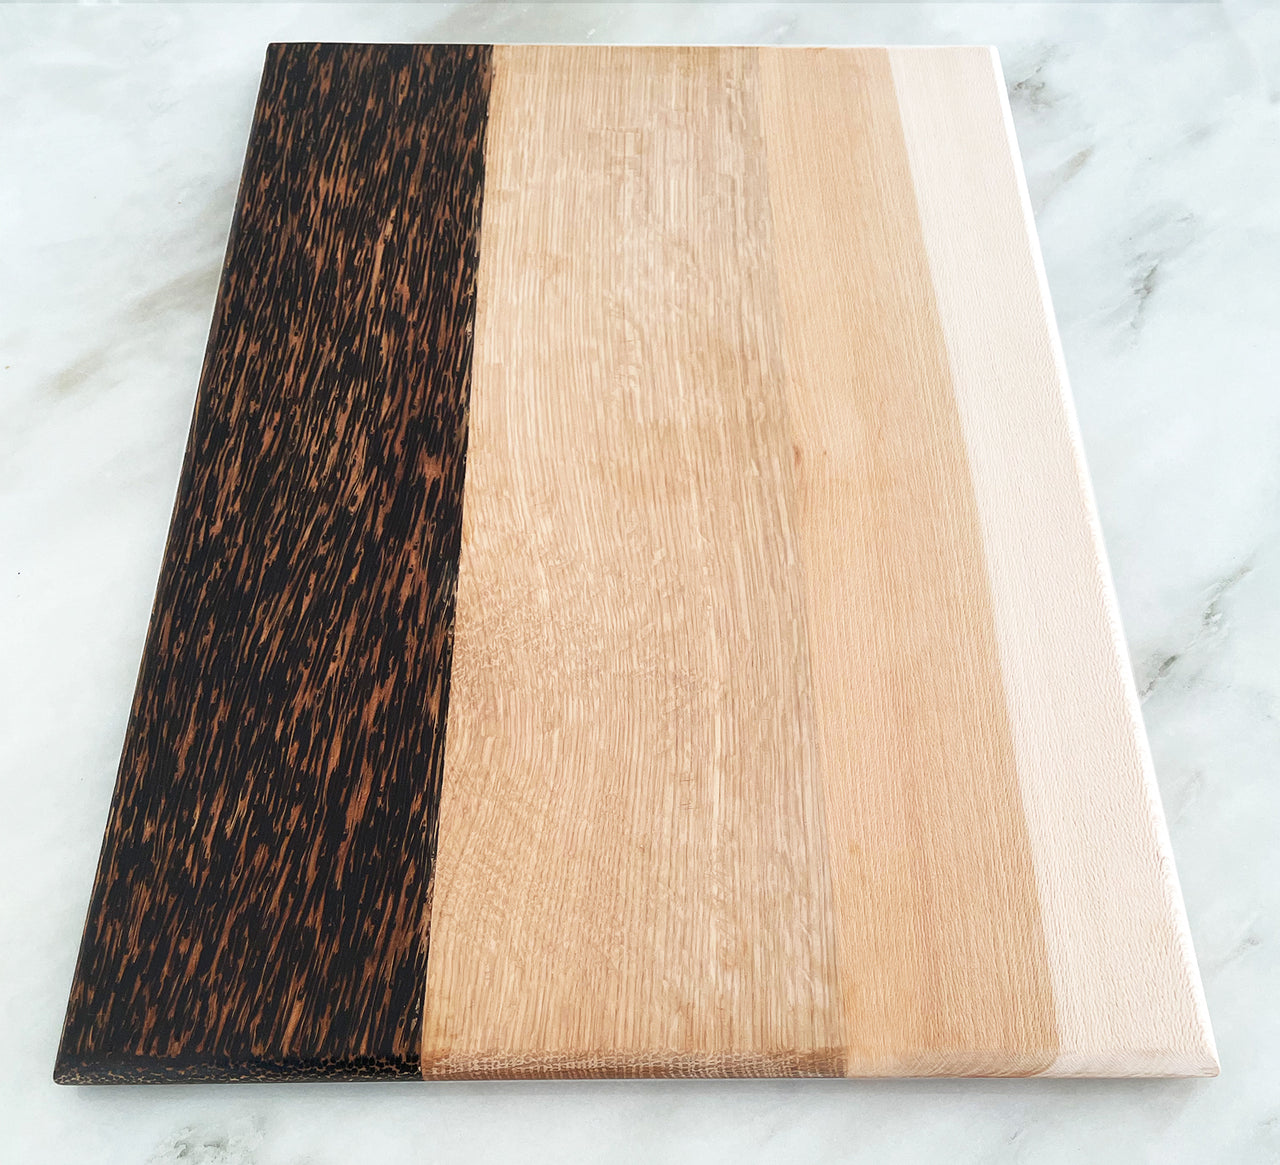 Sycamore + Wenge Charcuterie Board "The Lynwood"